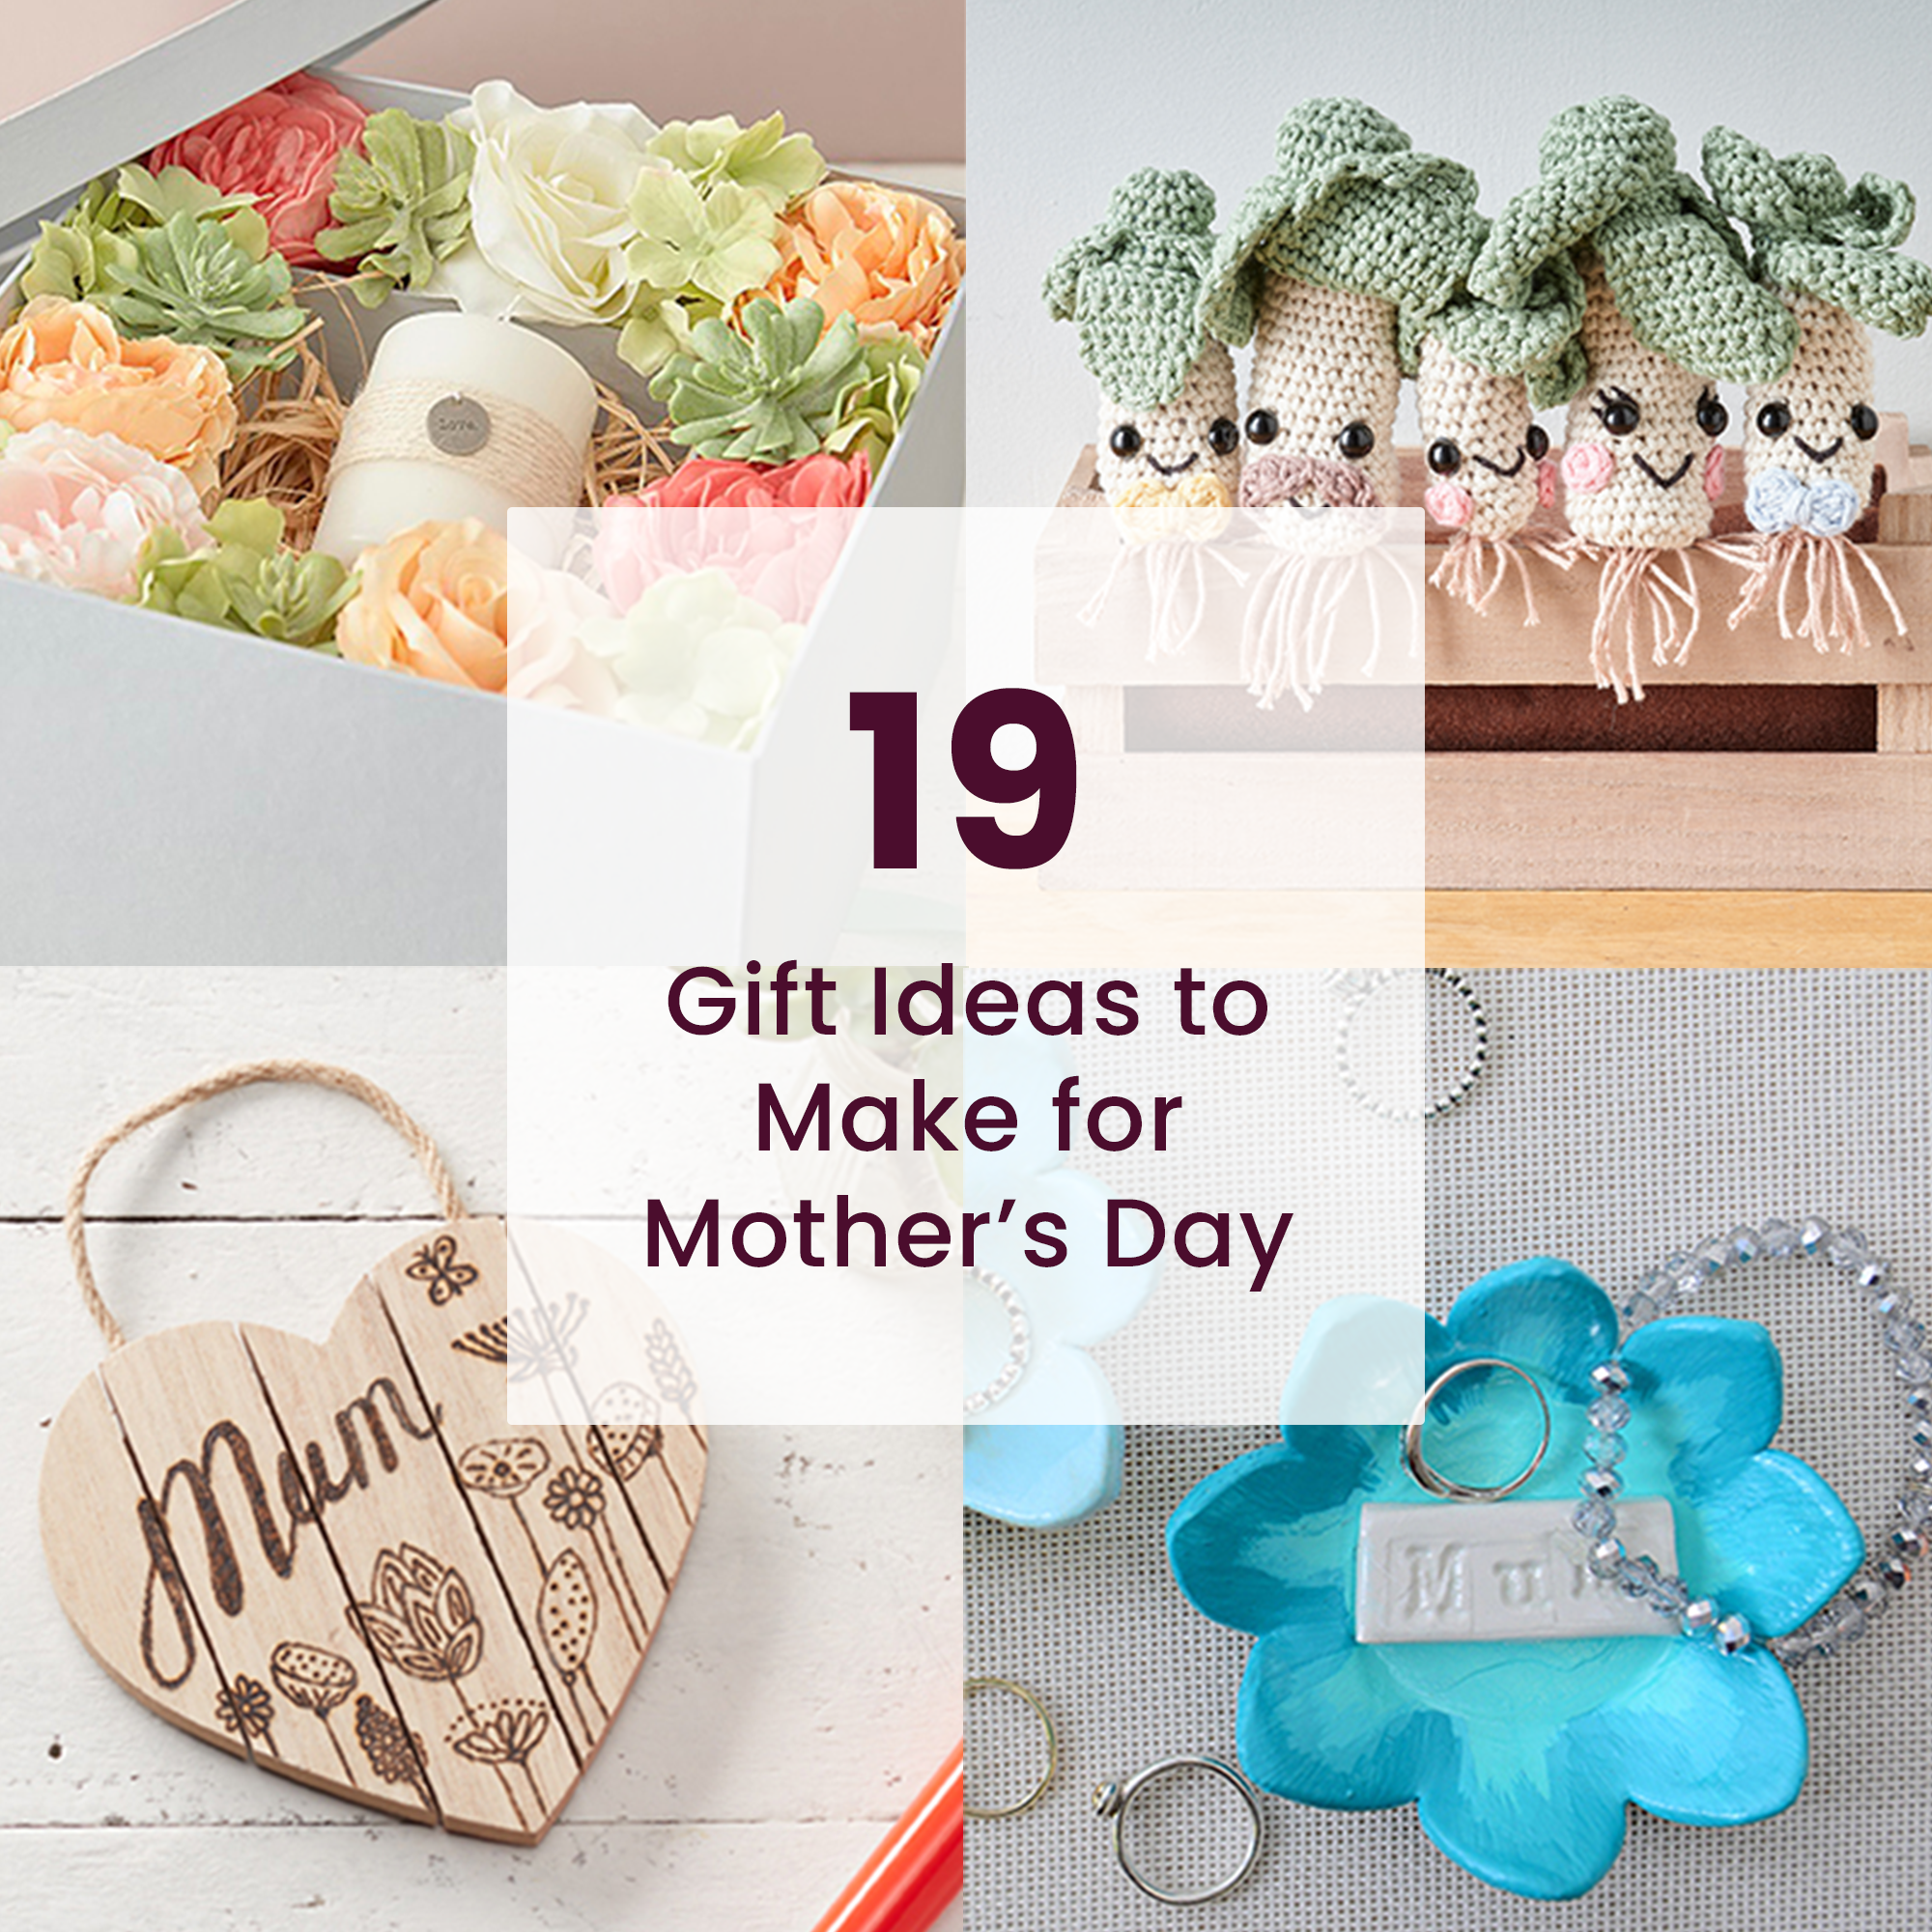 DIY DOLLAR TREE MOTHERS DAY GIFT IDEAS - YouTube